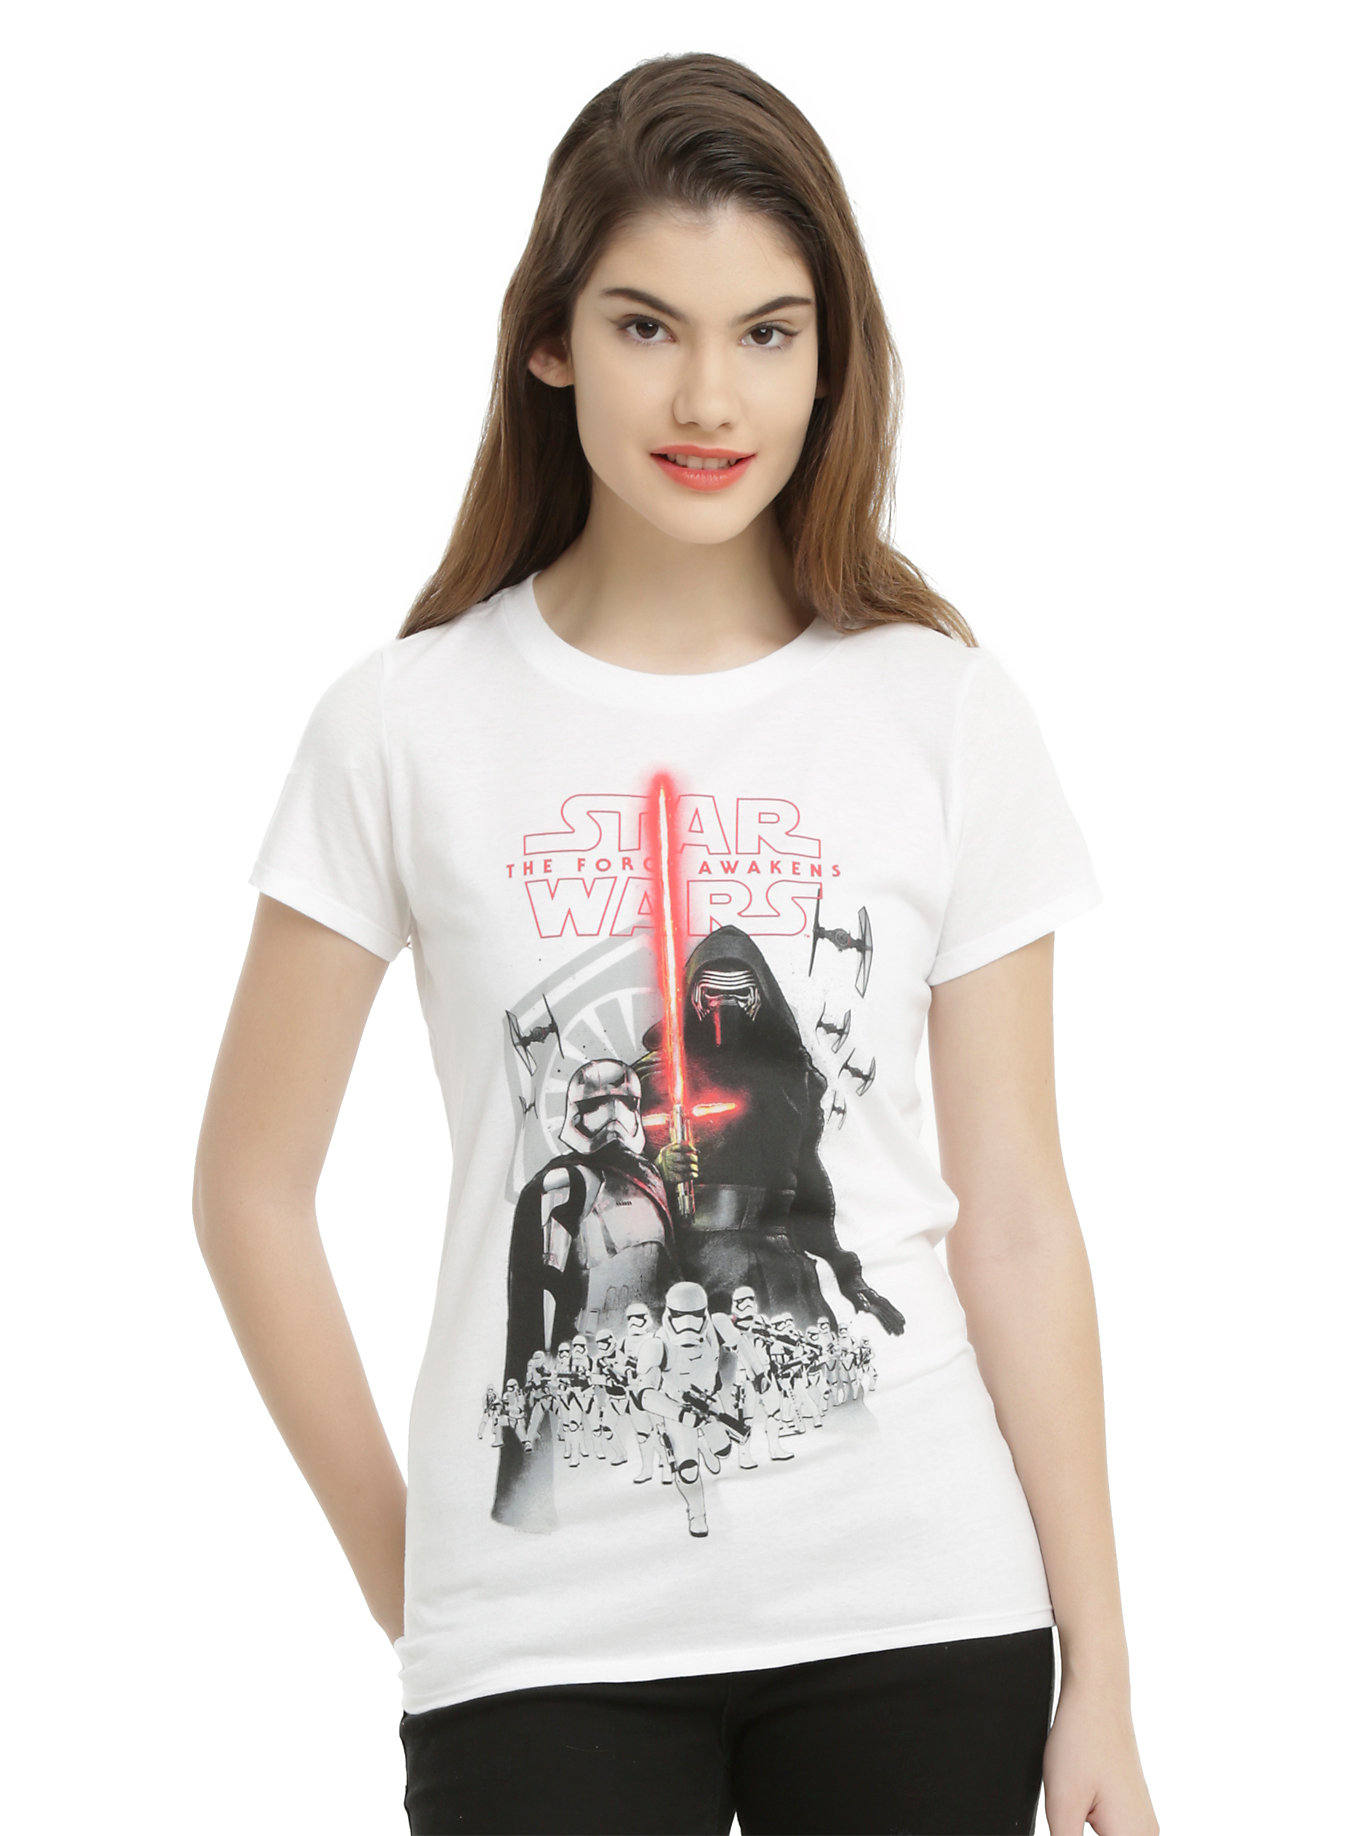 New First Order tee at Hot Topic